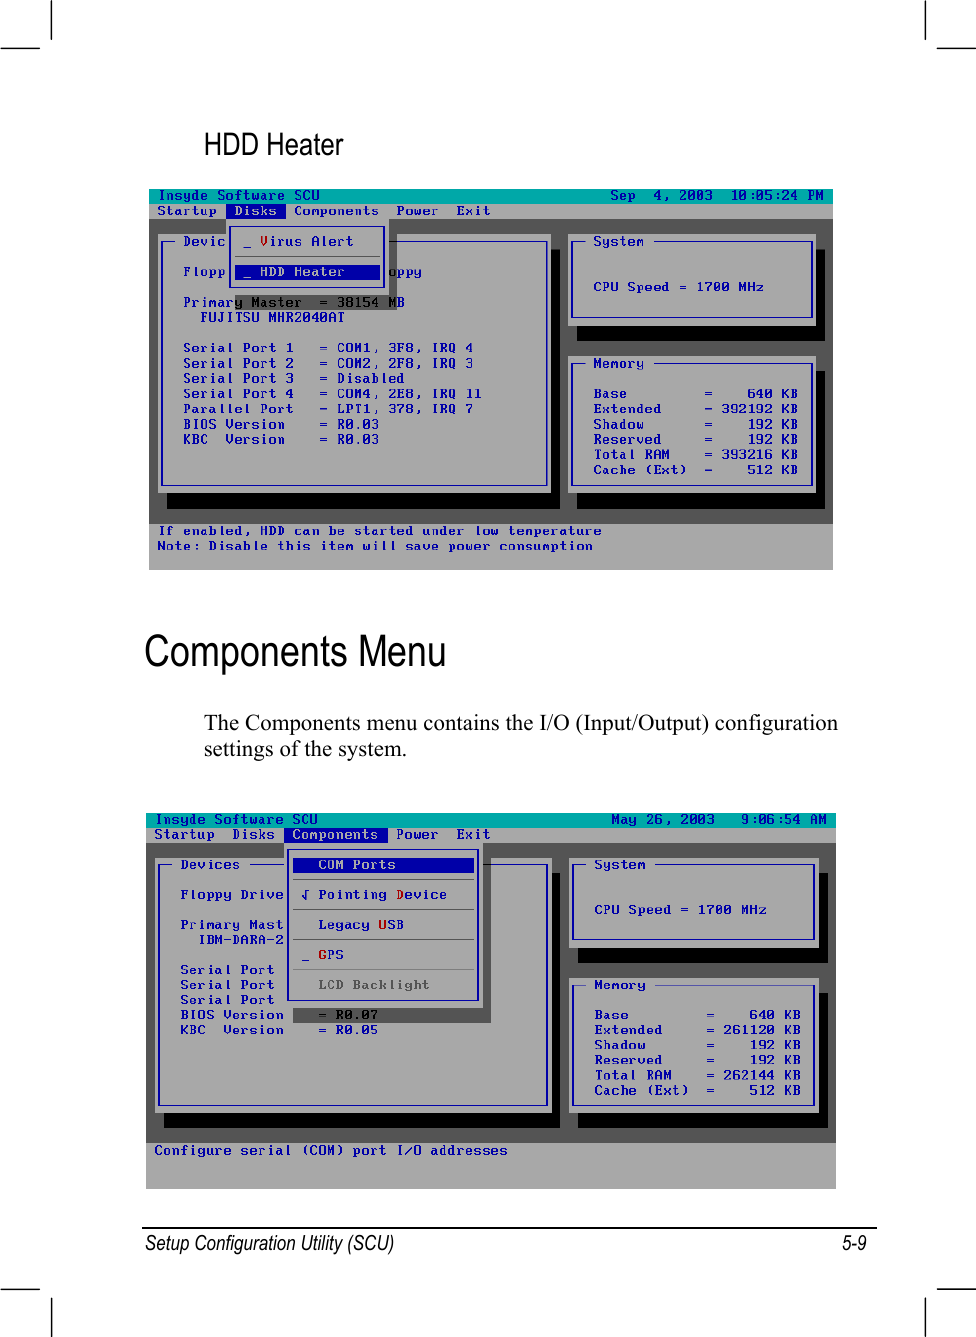 Setup Configuration Utility (SCU) 5-9HDD HeaterComponents MenuThe Components menu contains the I/O (Input/Output) configurationsettings of the system.